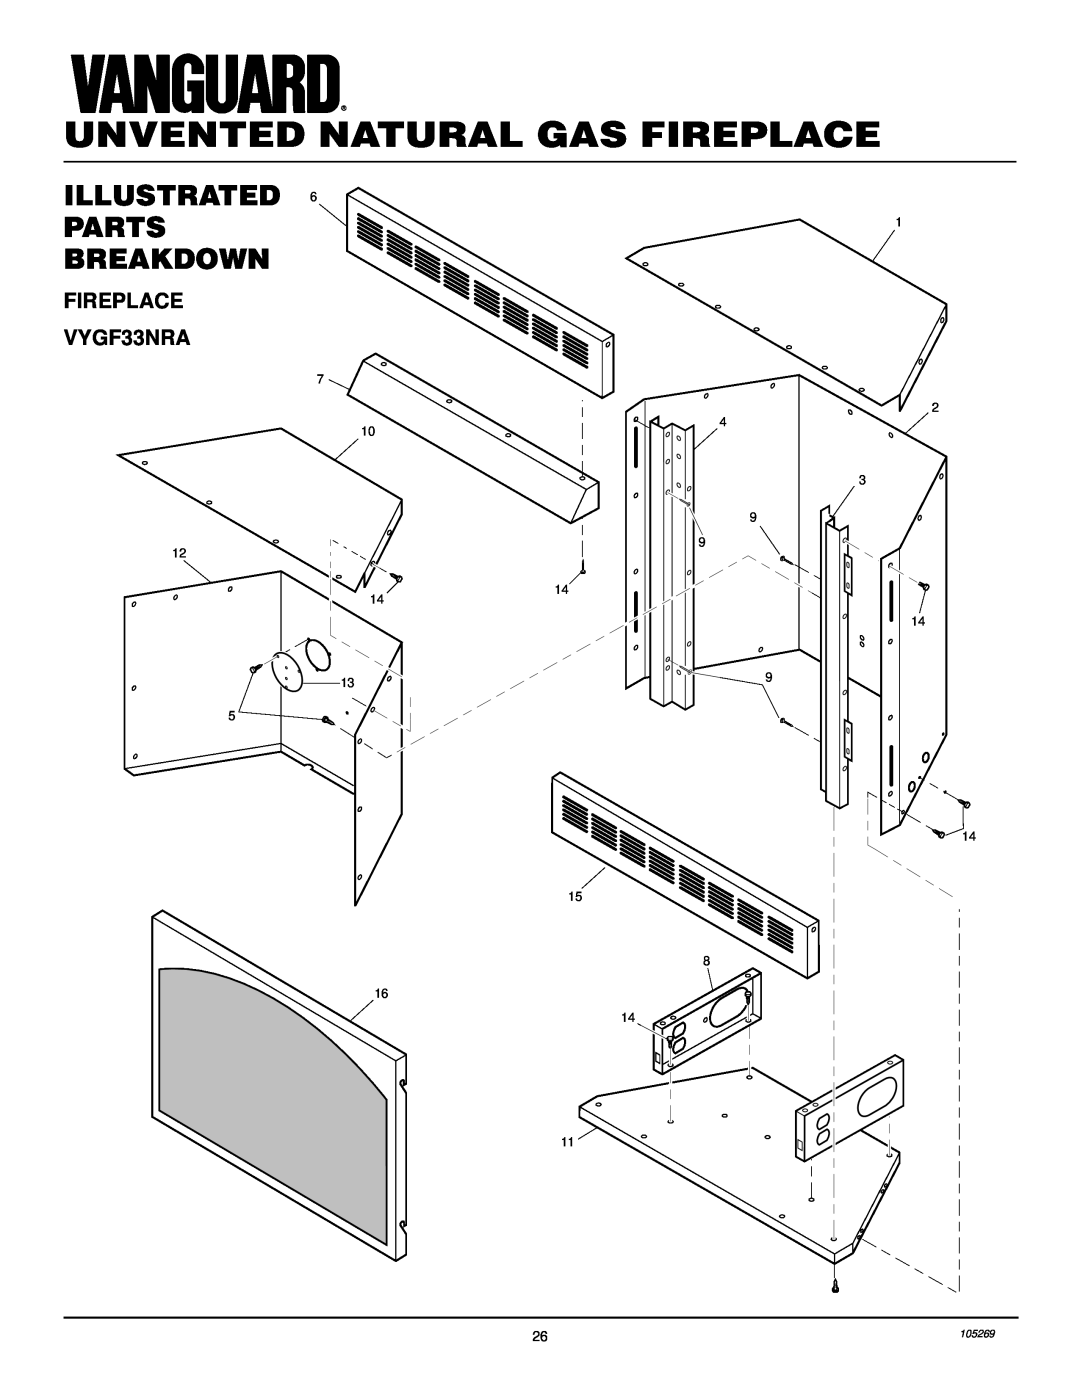 Vanguard Heating FIREPLACE VYGF33NRA, Unvented Natural Gas Fireplace, Illustrated Parts Breakdown, 7 10 12 14, 1 2 3 